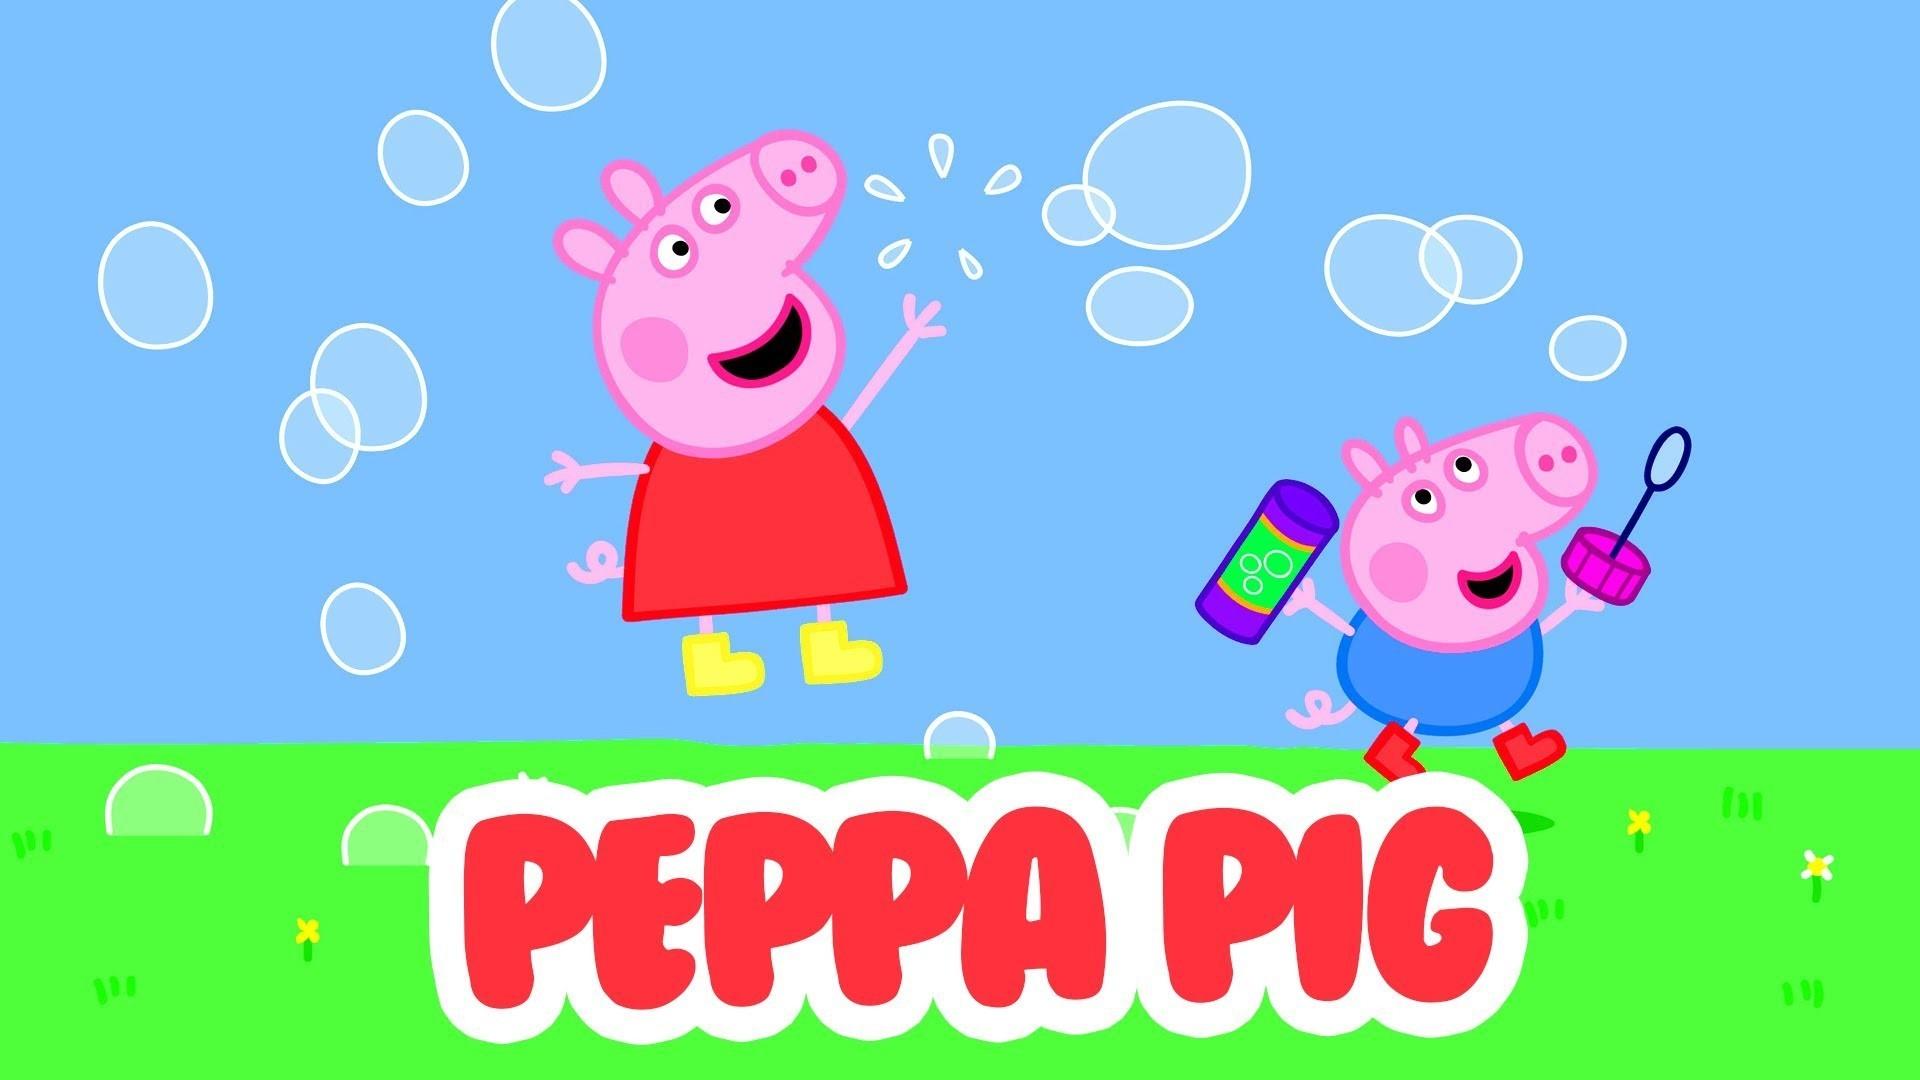 Peppa Pig Wallpaper background picture